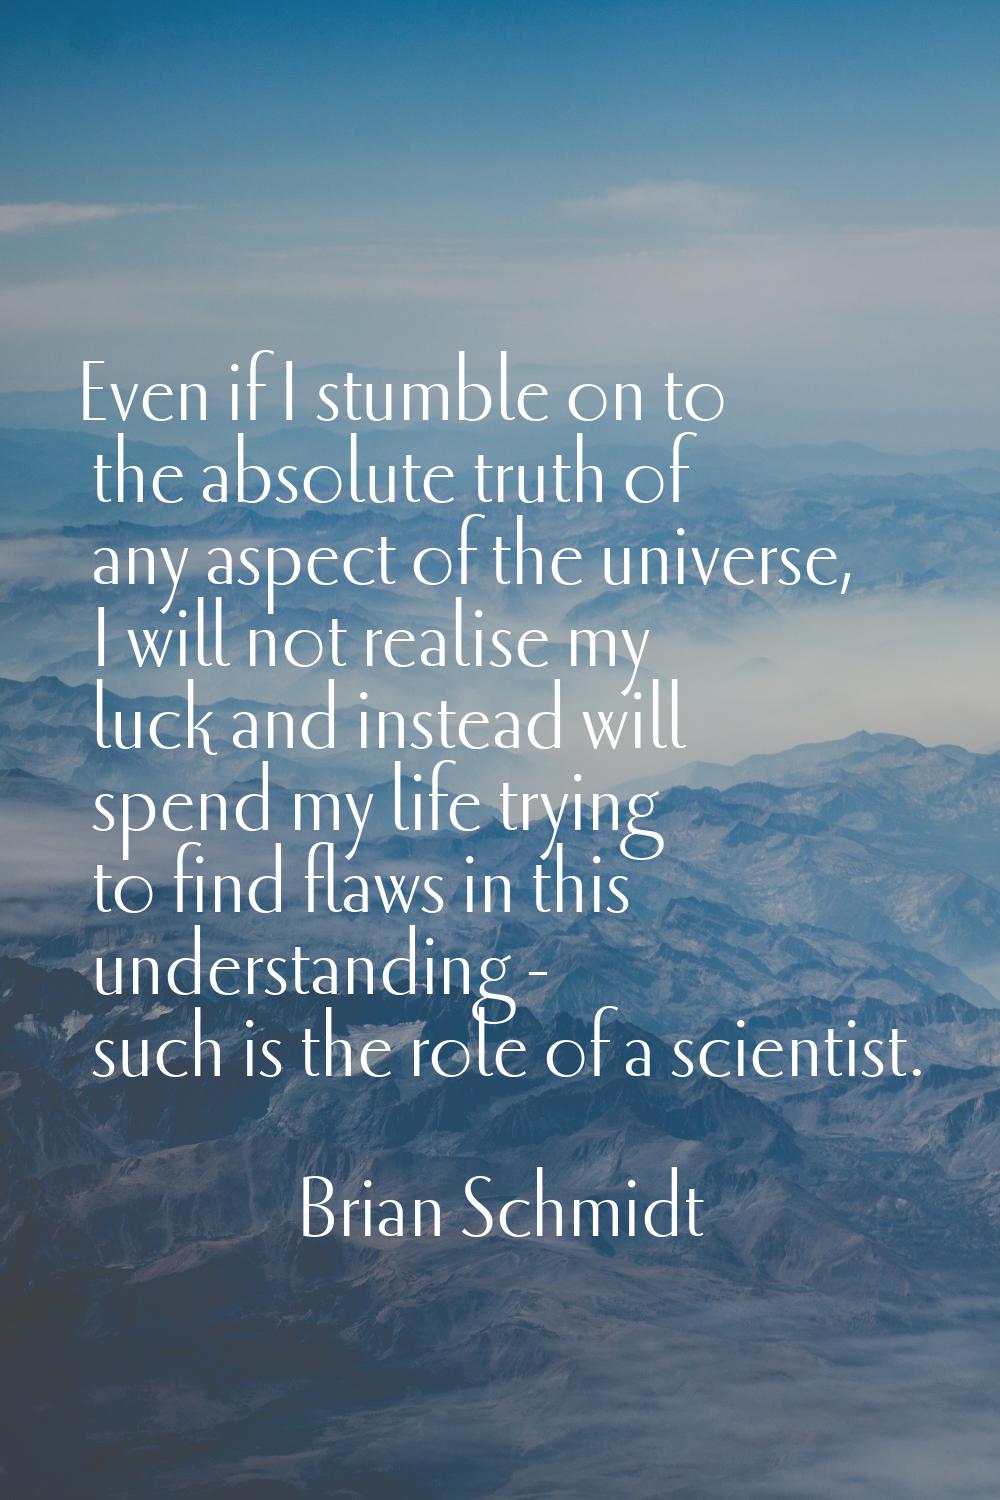 Even if I stumble on to the absolute truth of any aspect of the universe, I will not realise my luc